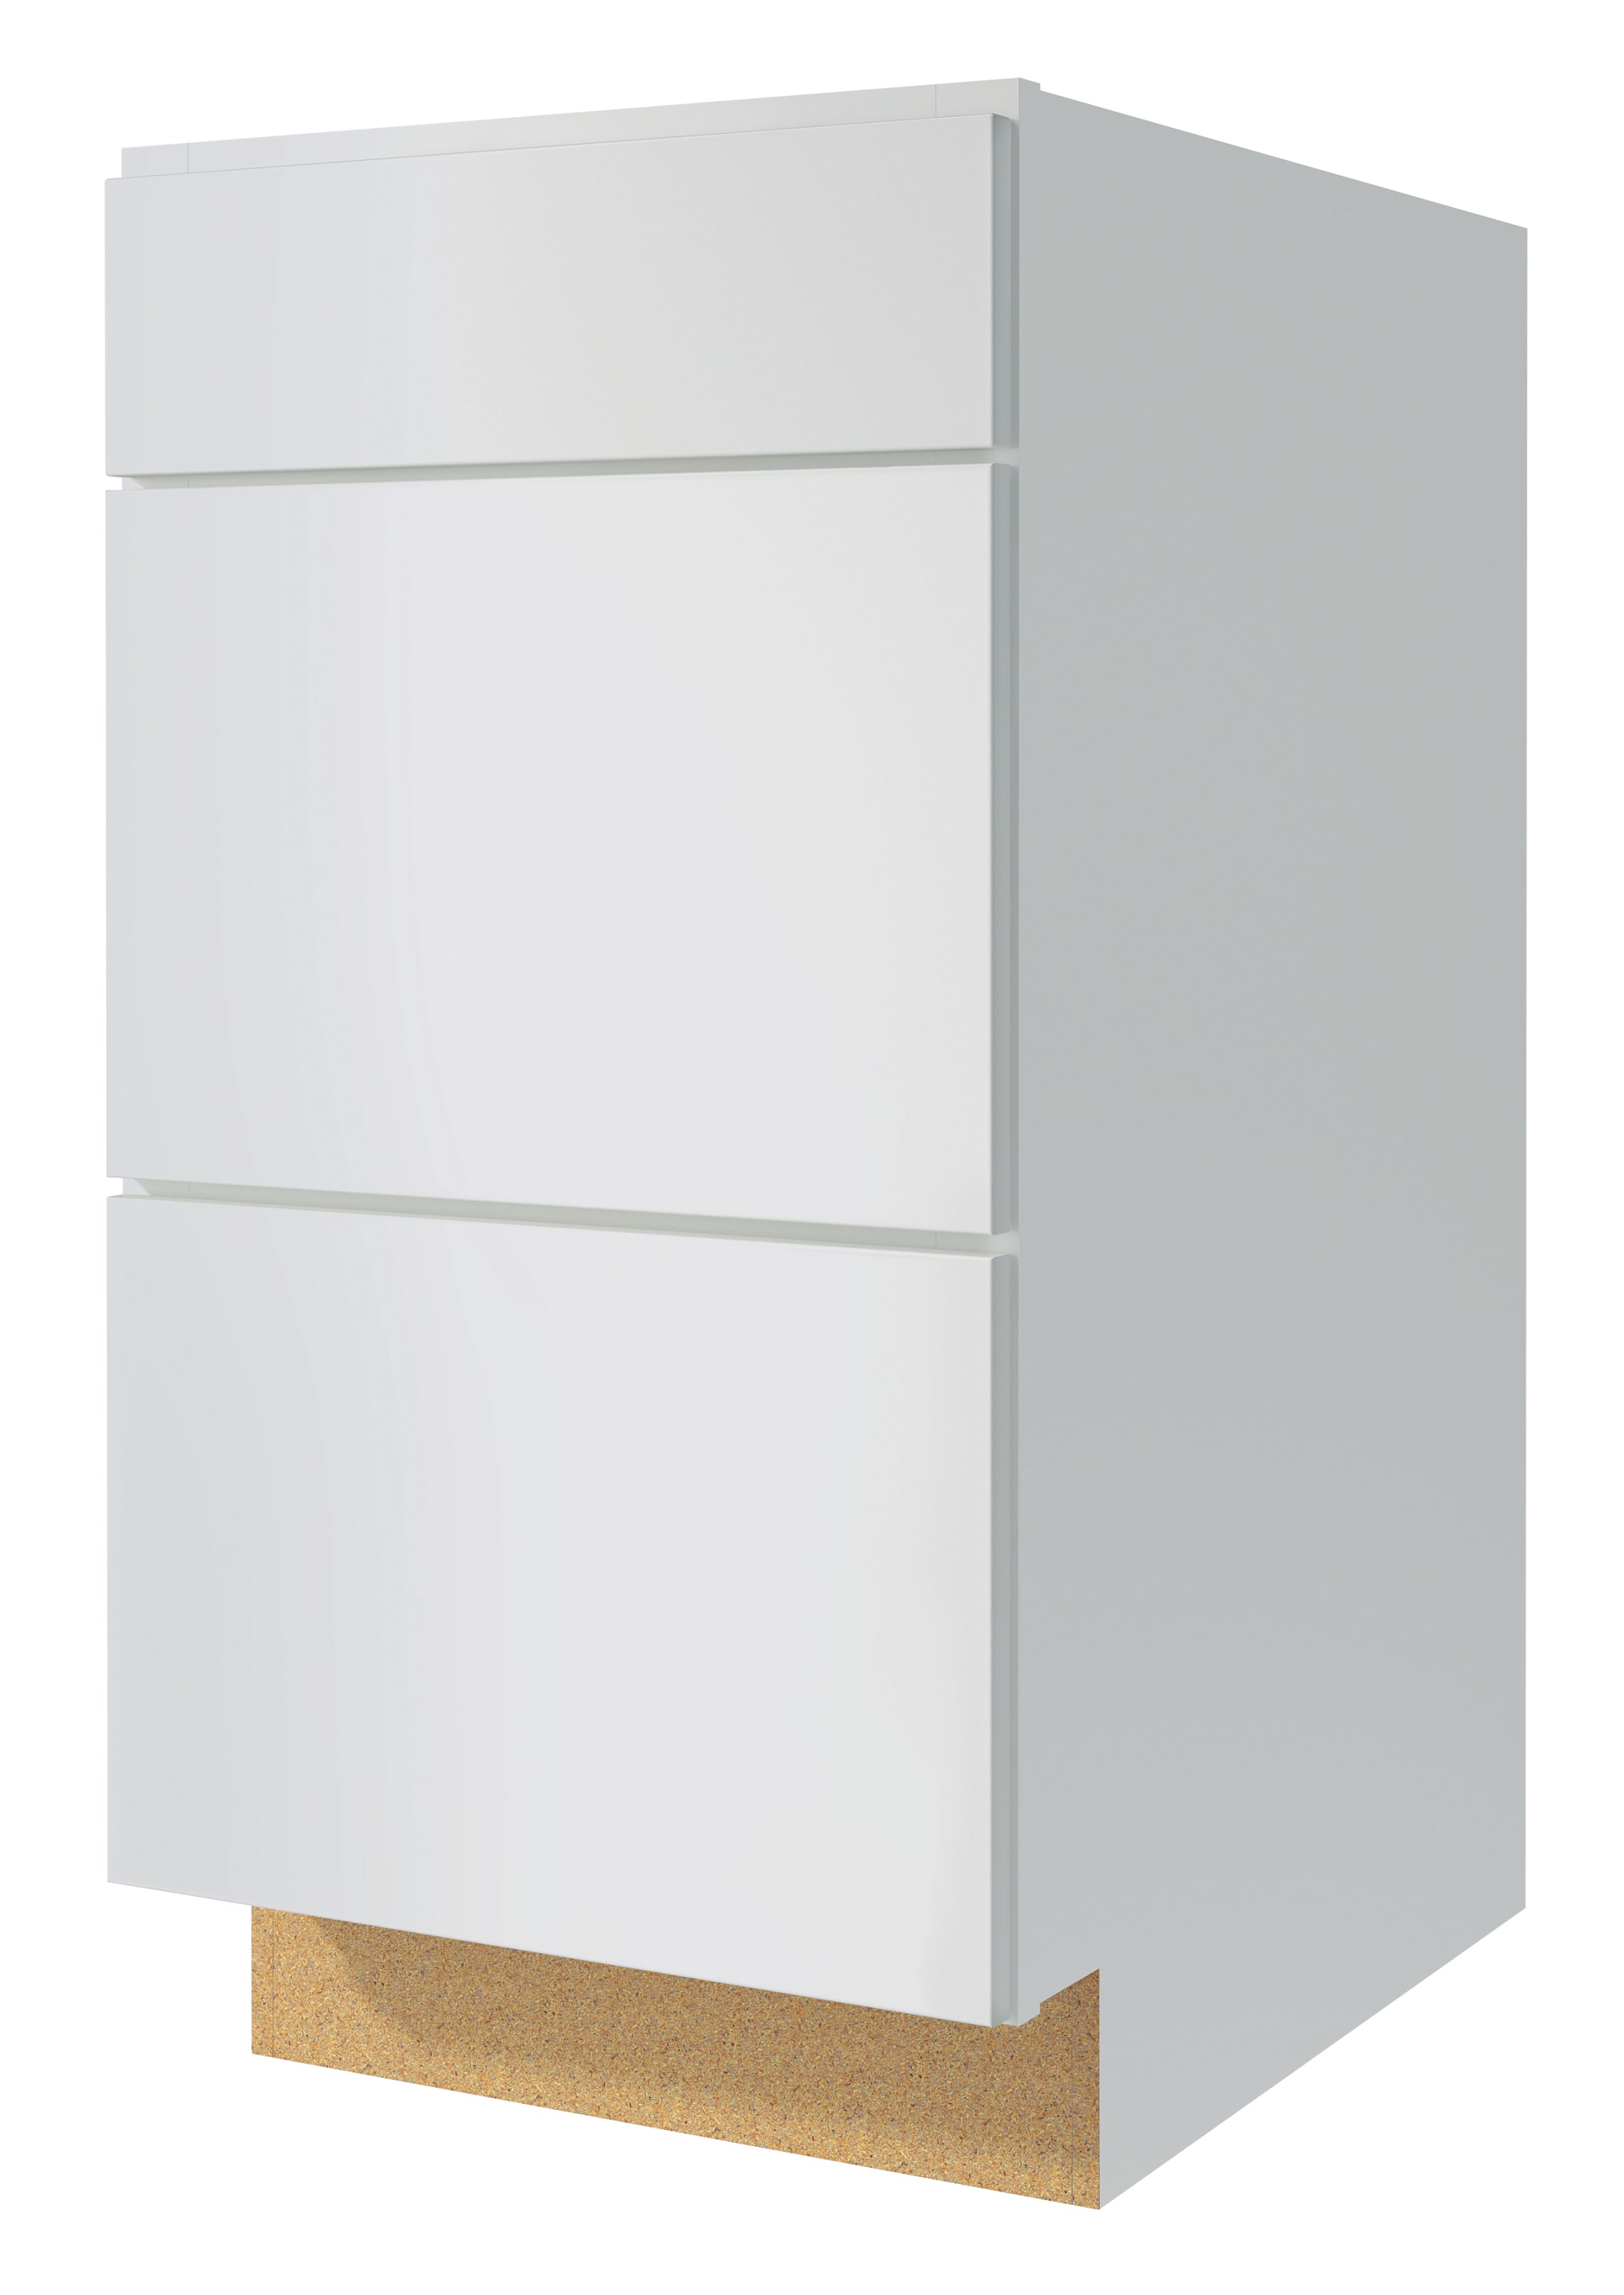 Diamond at Lowes - Organization - Base Paper Towel Cabinet